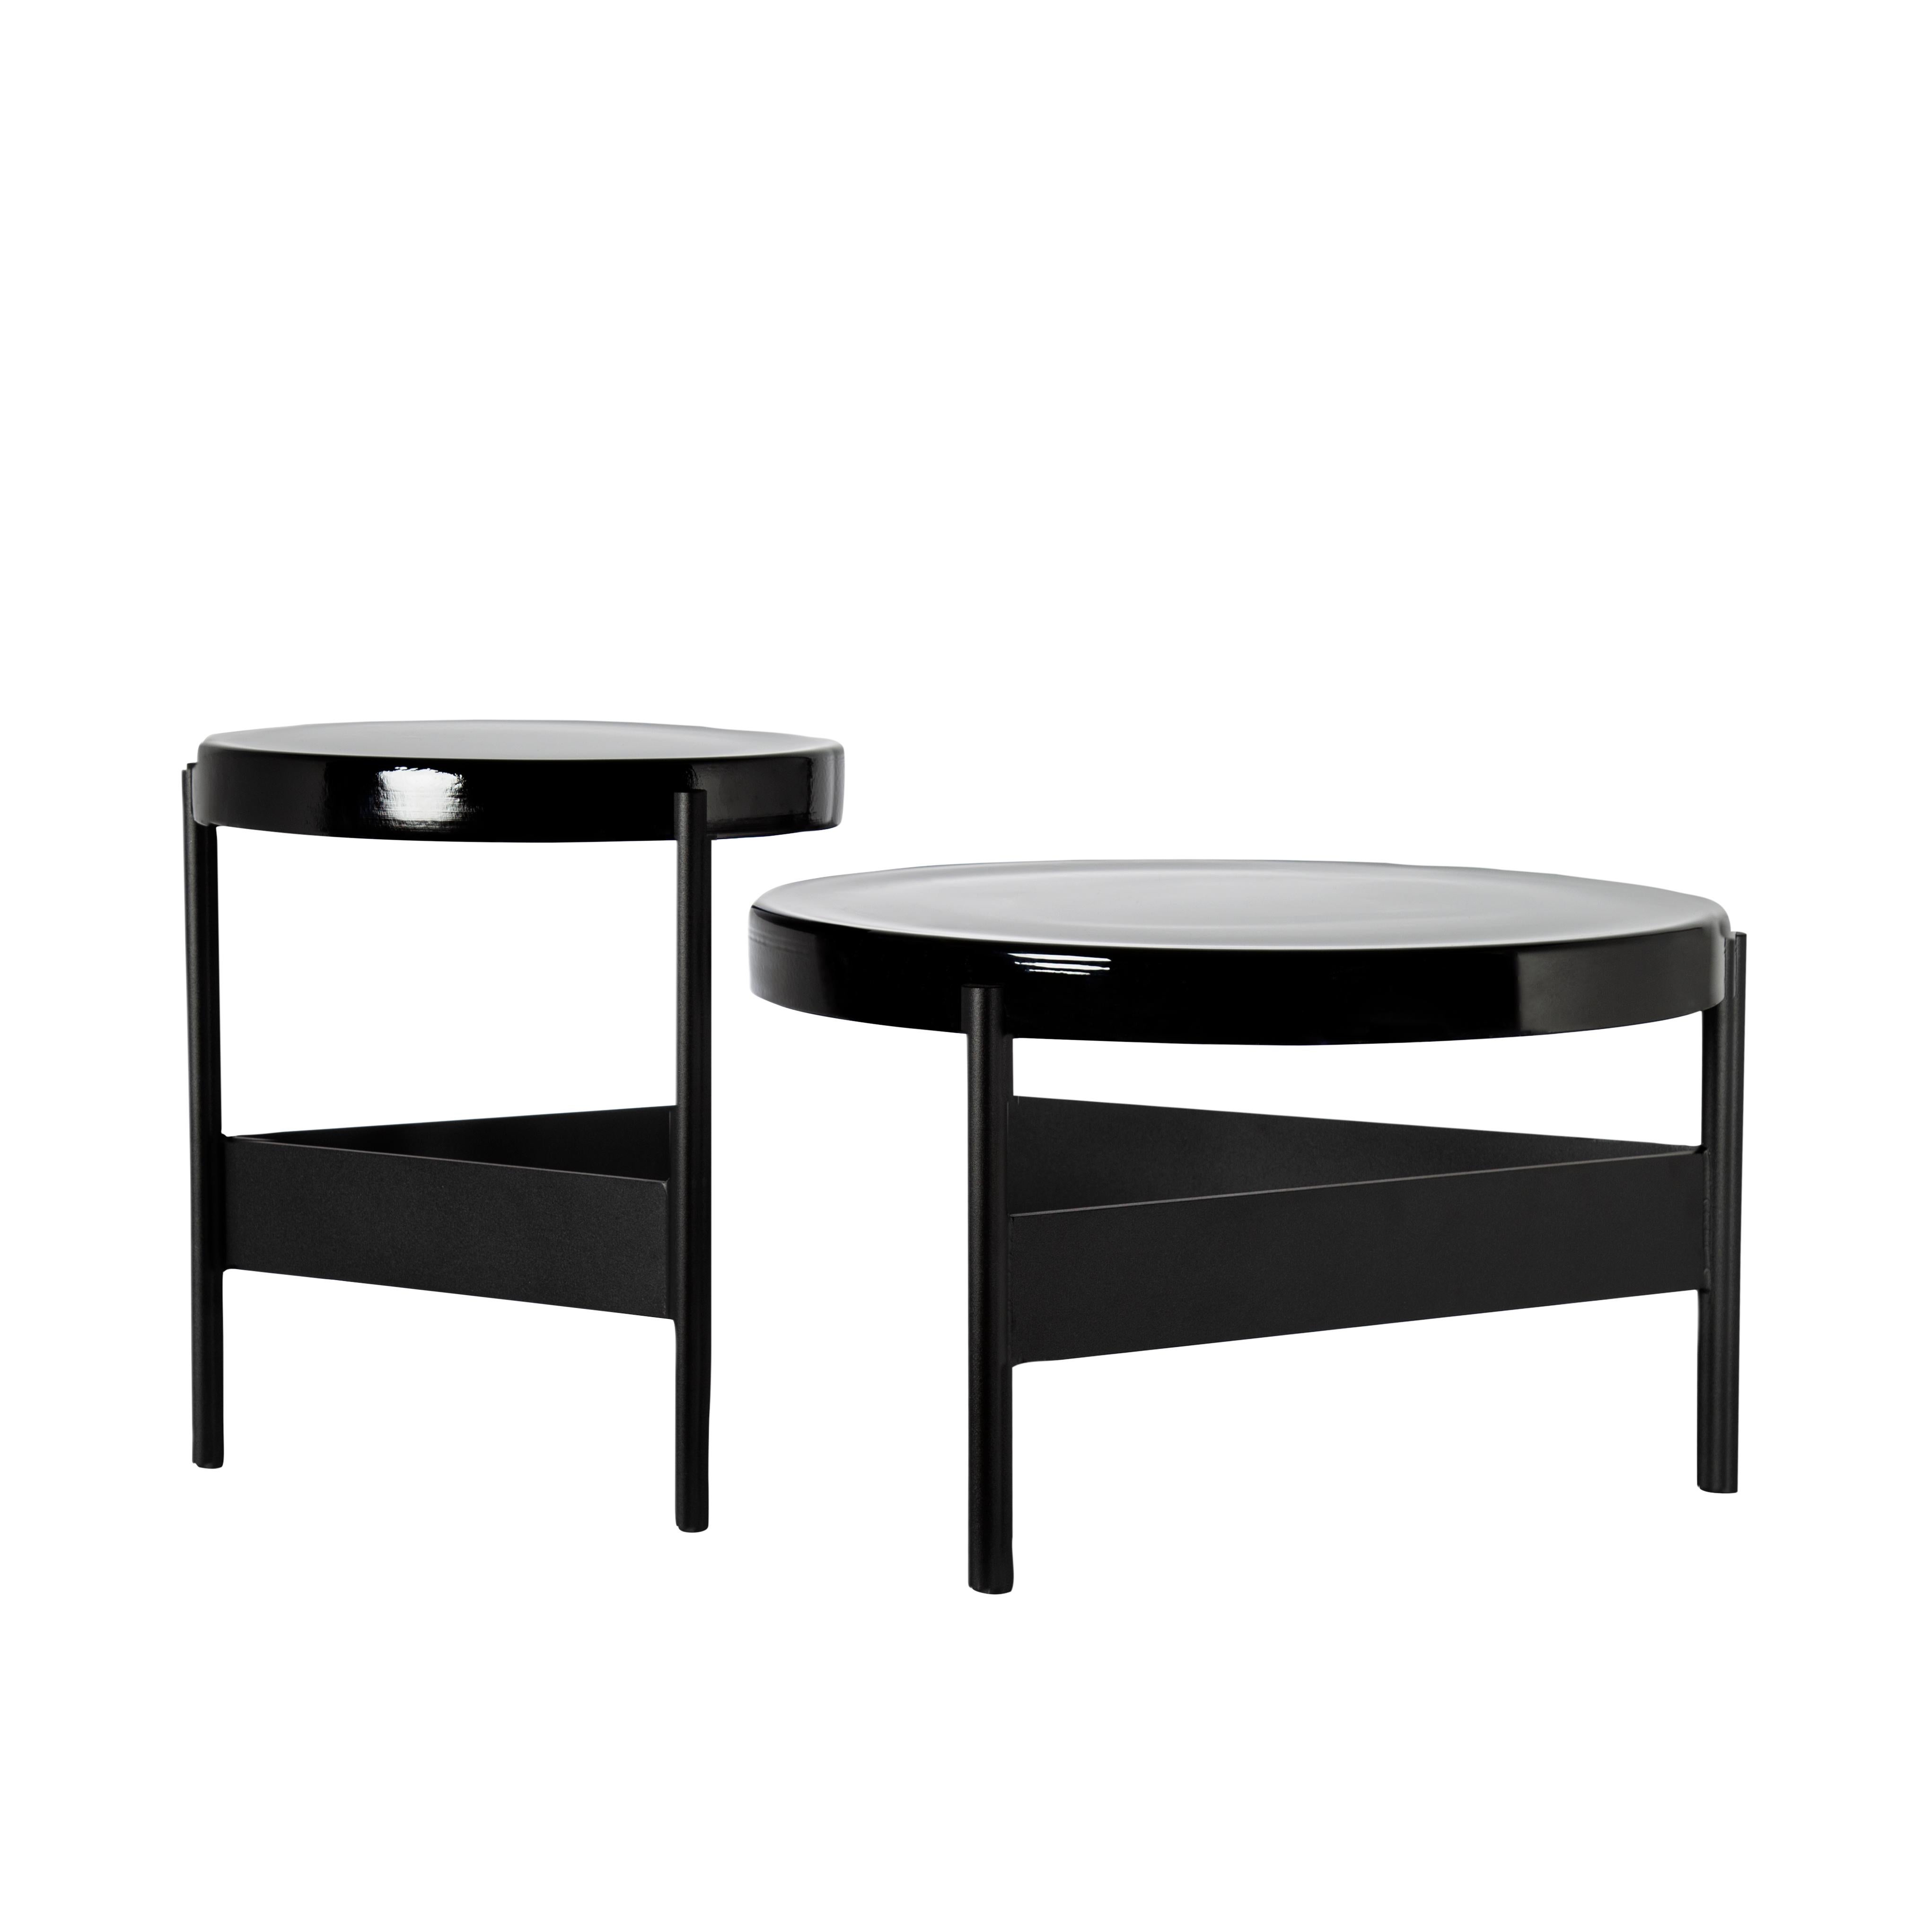 Set of 2 Alwa two tables by Pulpo.
Dimensions: D56 x H35 cm // D 38 x H 44 cm.
Materials: casted glass; powder coated steel 

Also available in different finishes.

Normally, glass is regarded as being lightweight with sharp edges. In